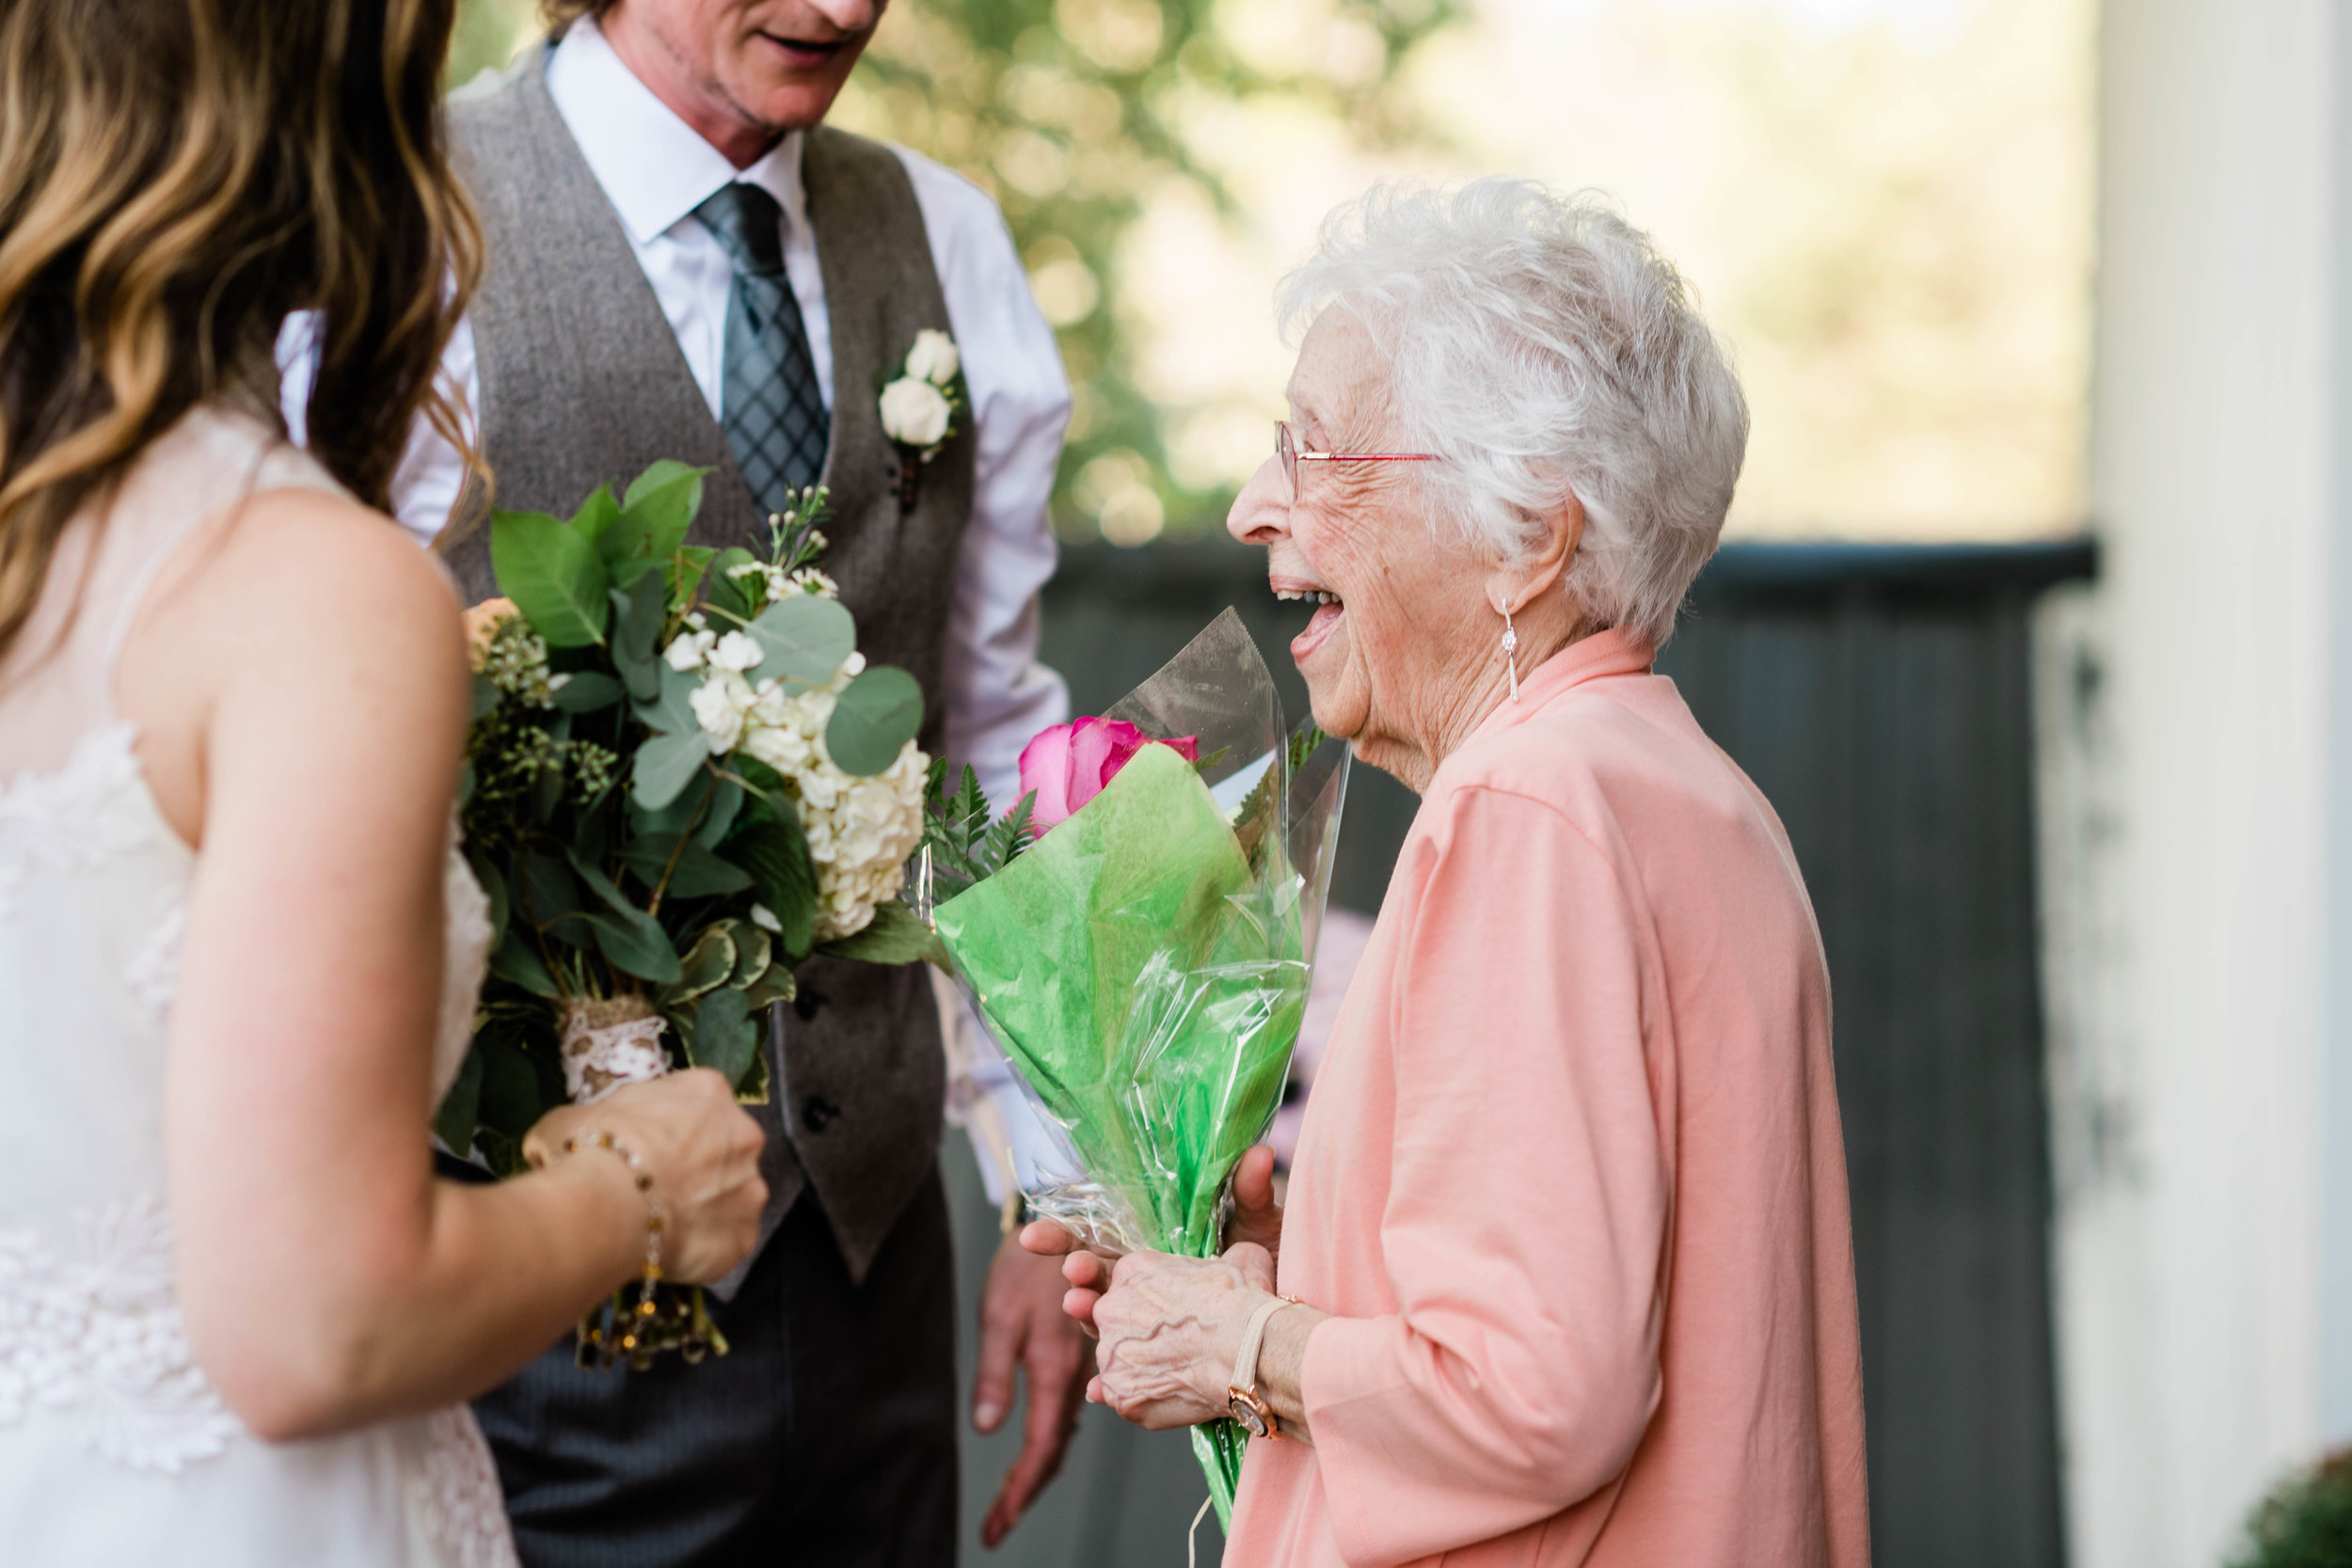 Grandma laughing with bride and groom